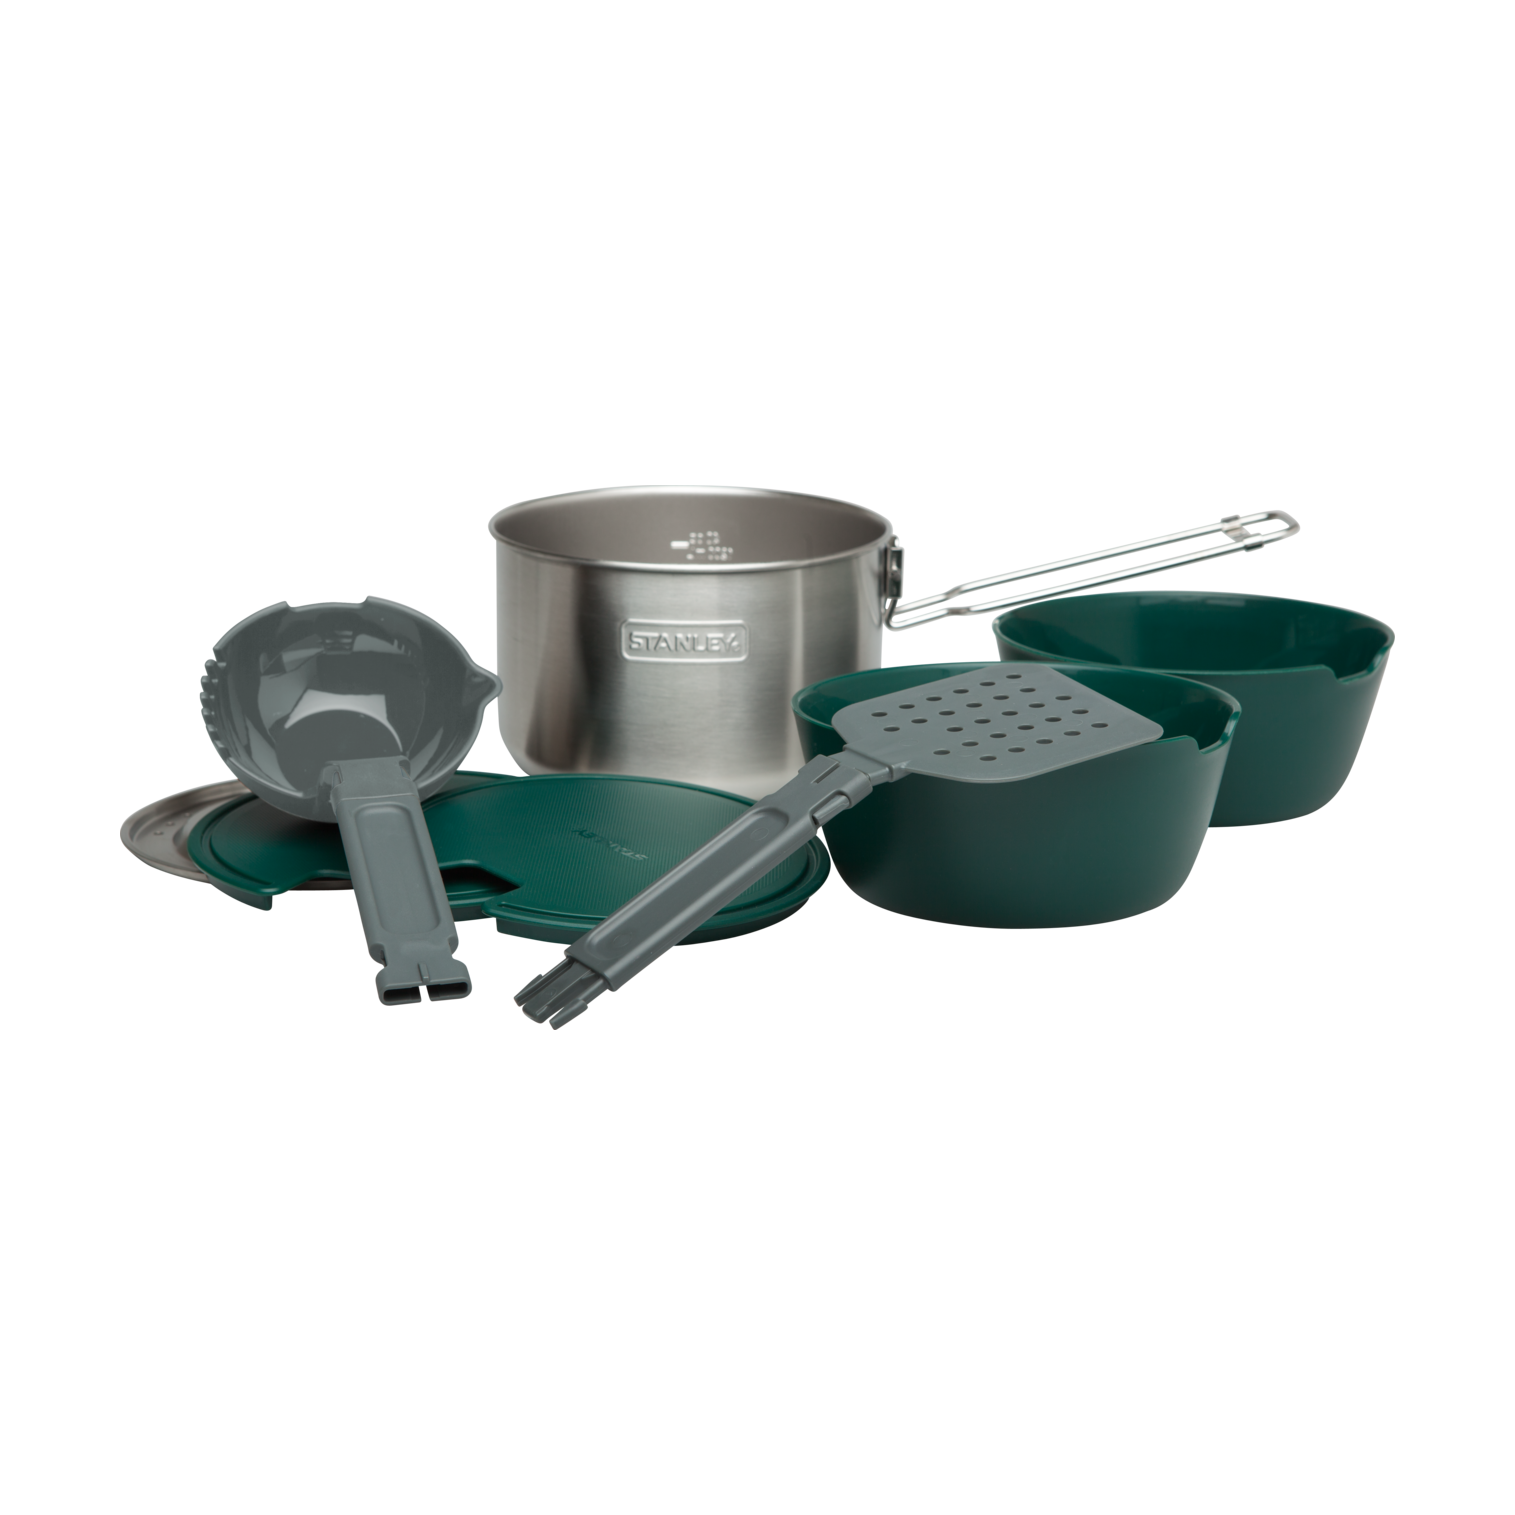 Adventure All-In-One Two Bowl Cookset: Stainless